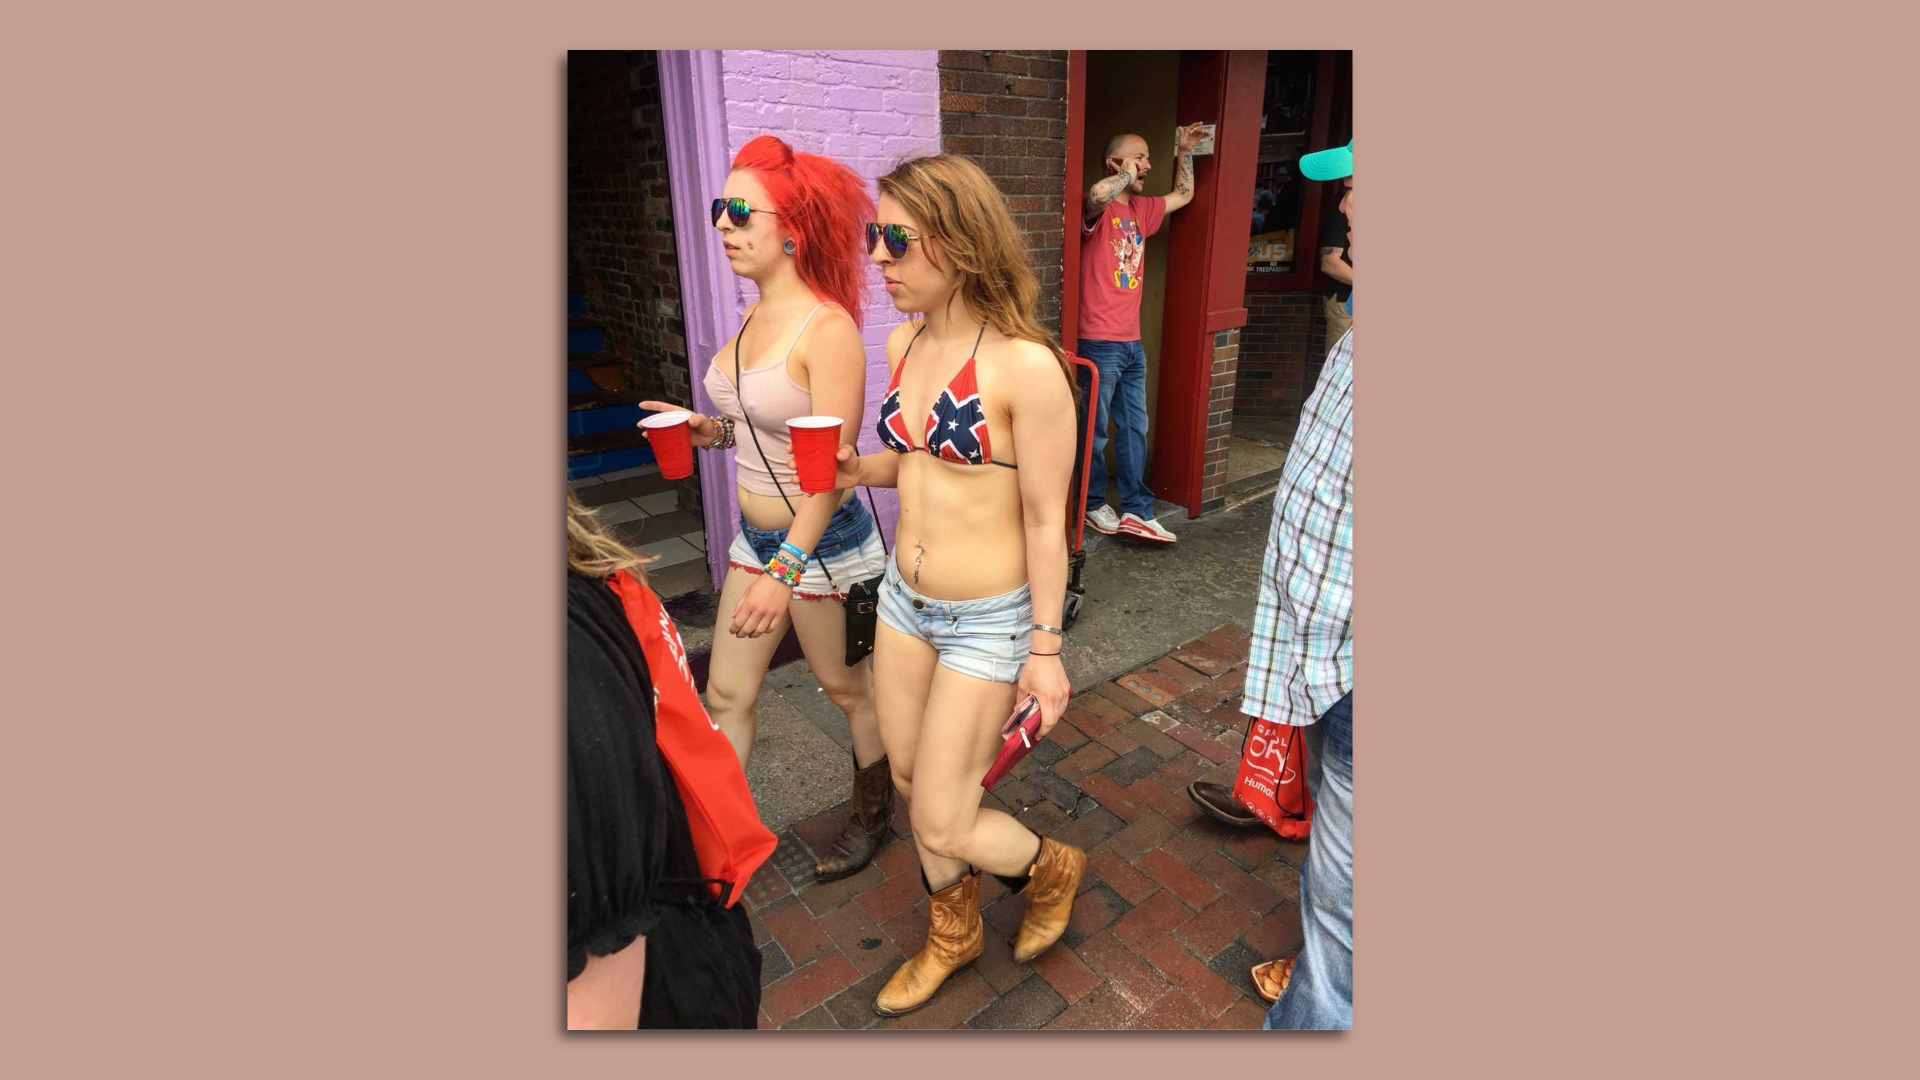 A woman wearing a bikini top with Confederate flag imagery.